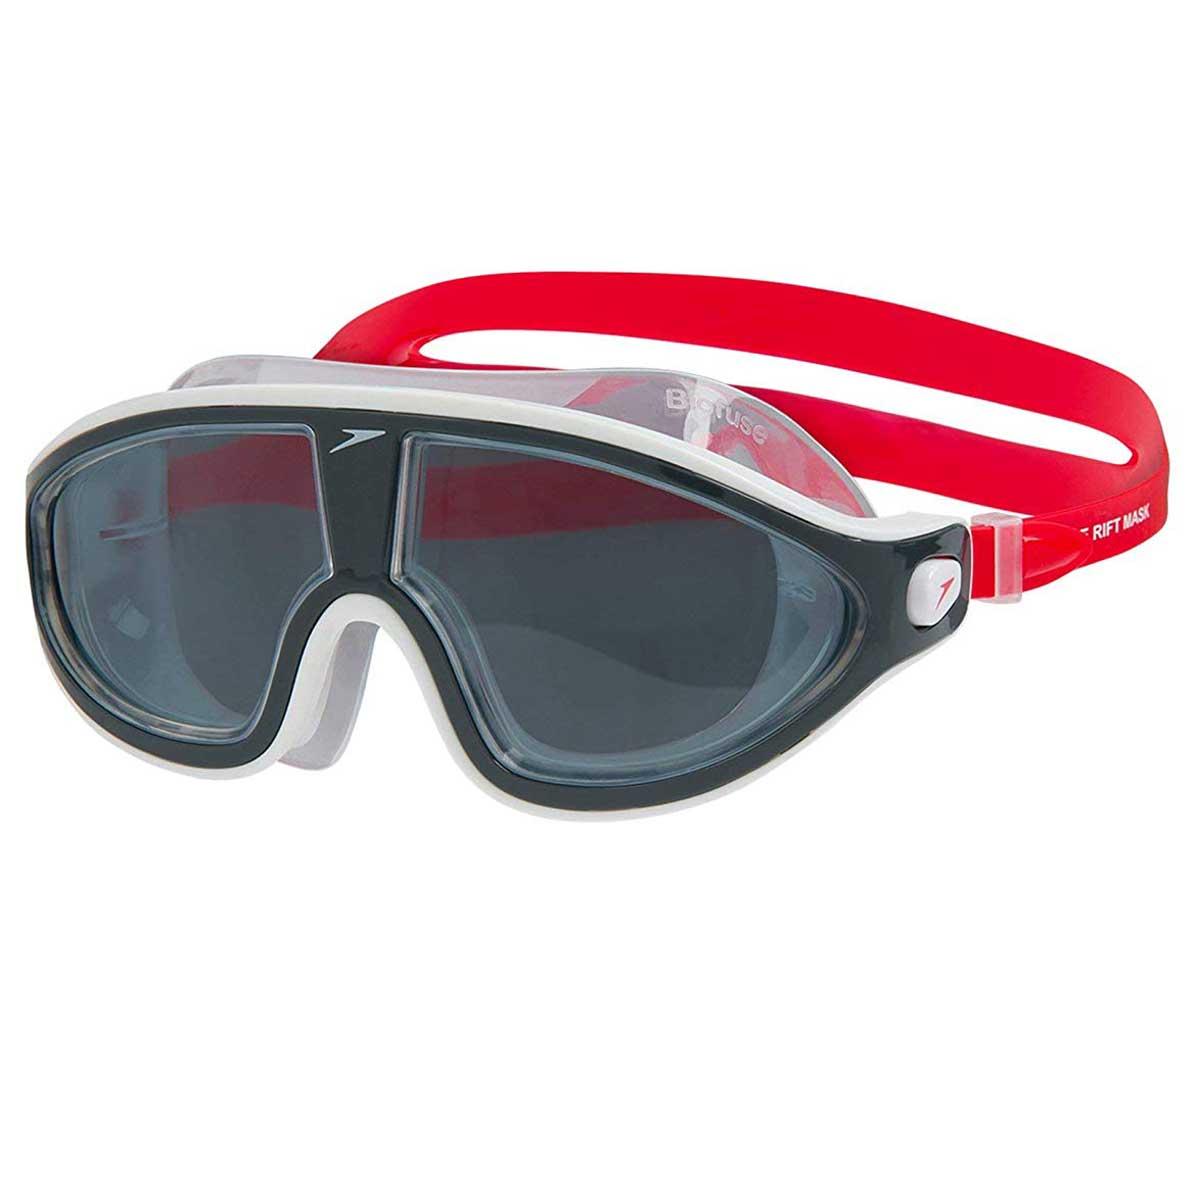 Buy Speedo Rift Swimming Goggles (Red/Smoke) Online at Lowest ...